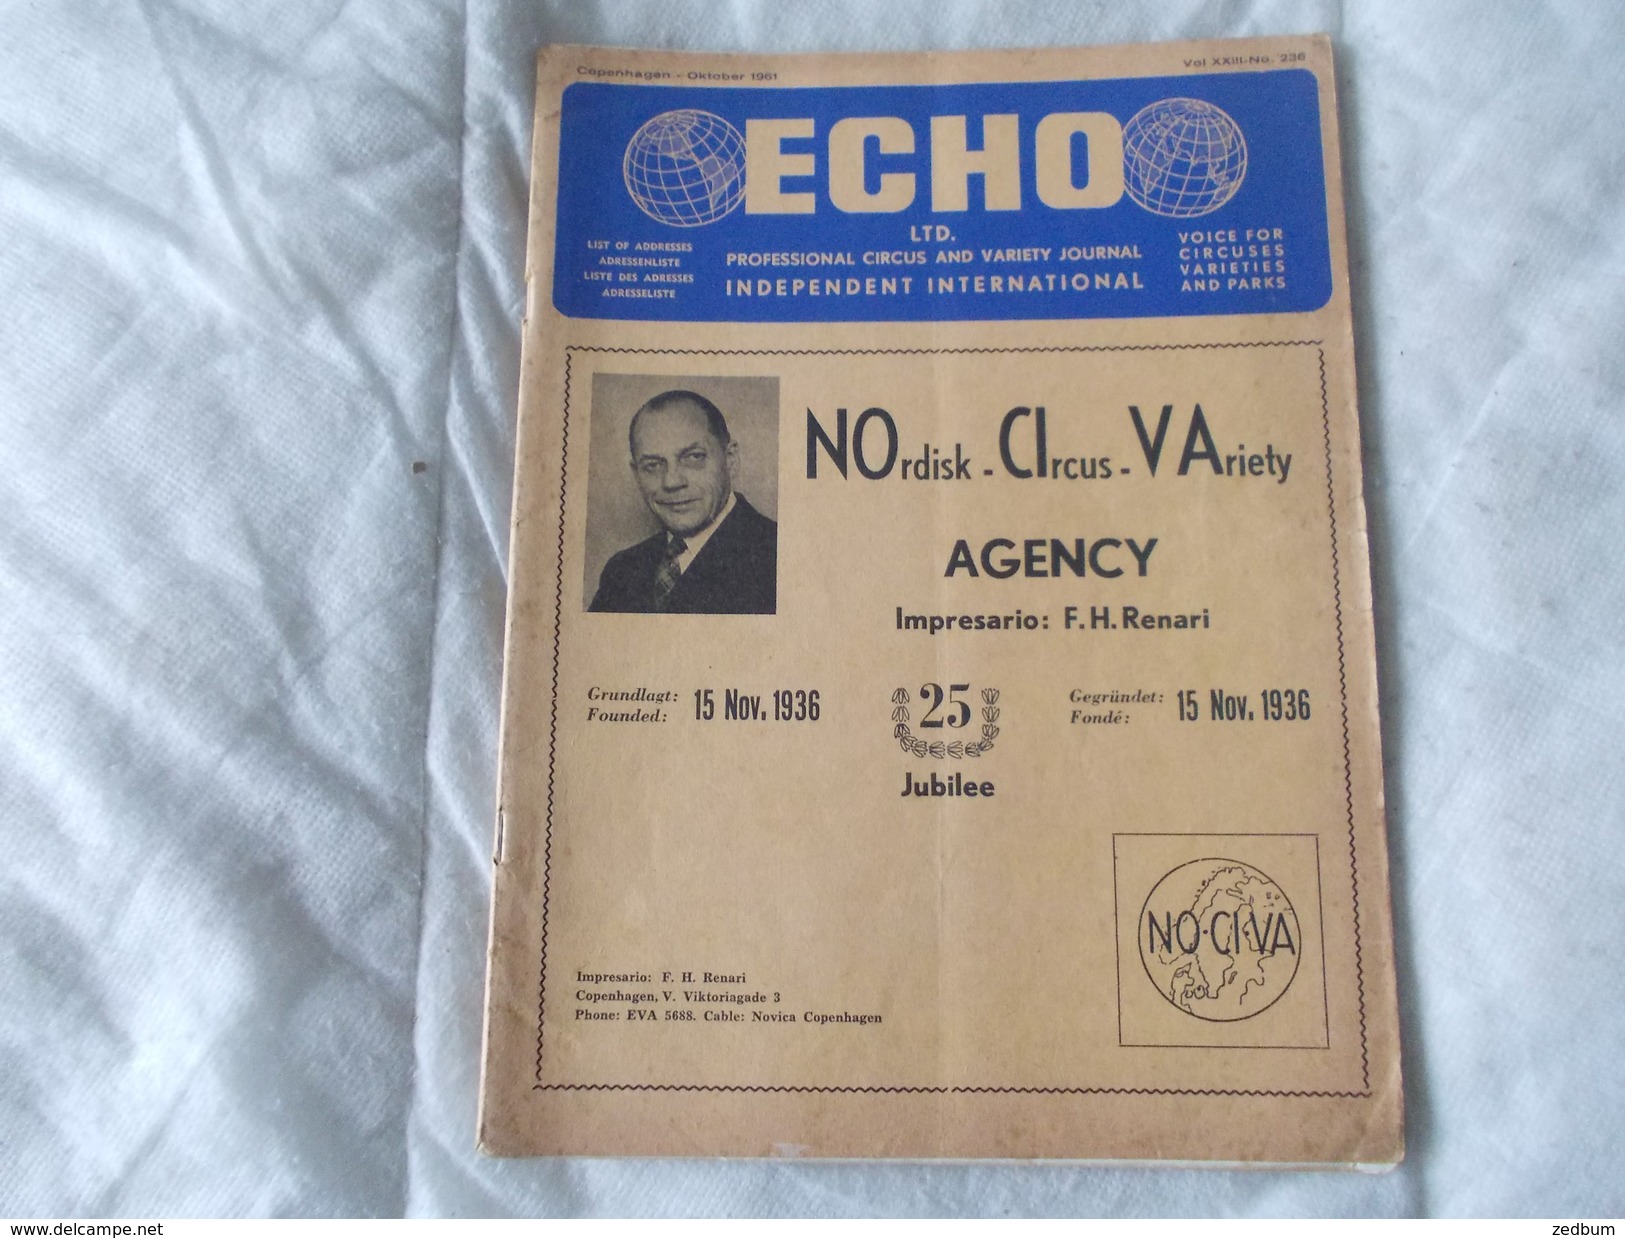 ECHO LTD Professional Circus And Variety Journal Independent International N° 236 October 1961 - Entertainment